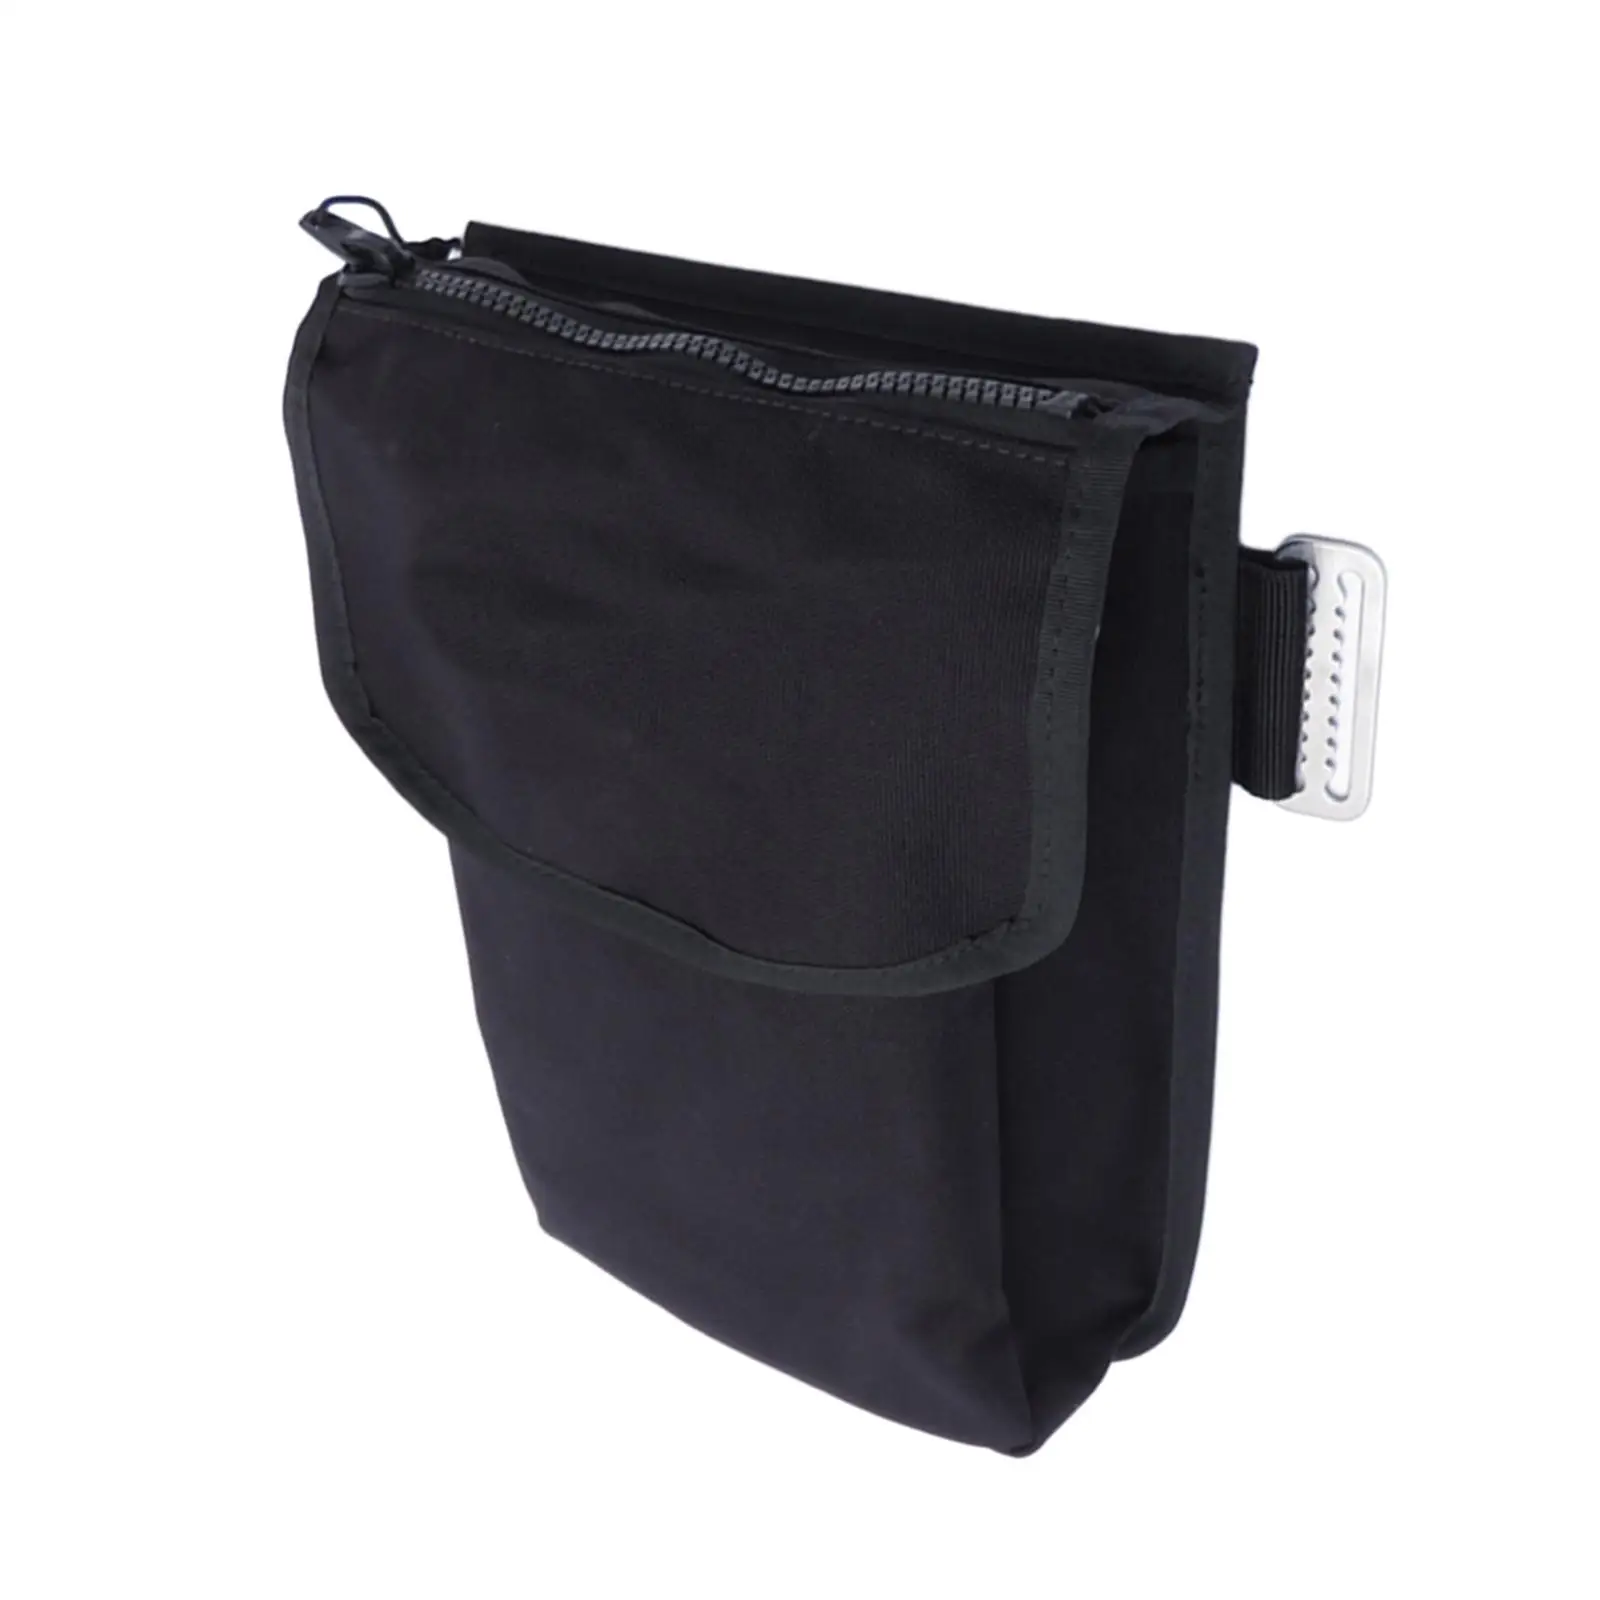 Technical Diving Bcd Drysuit Thigh Bag, Can Be Equipped with Weight, Double